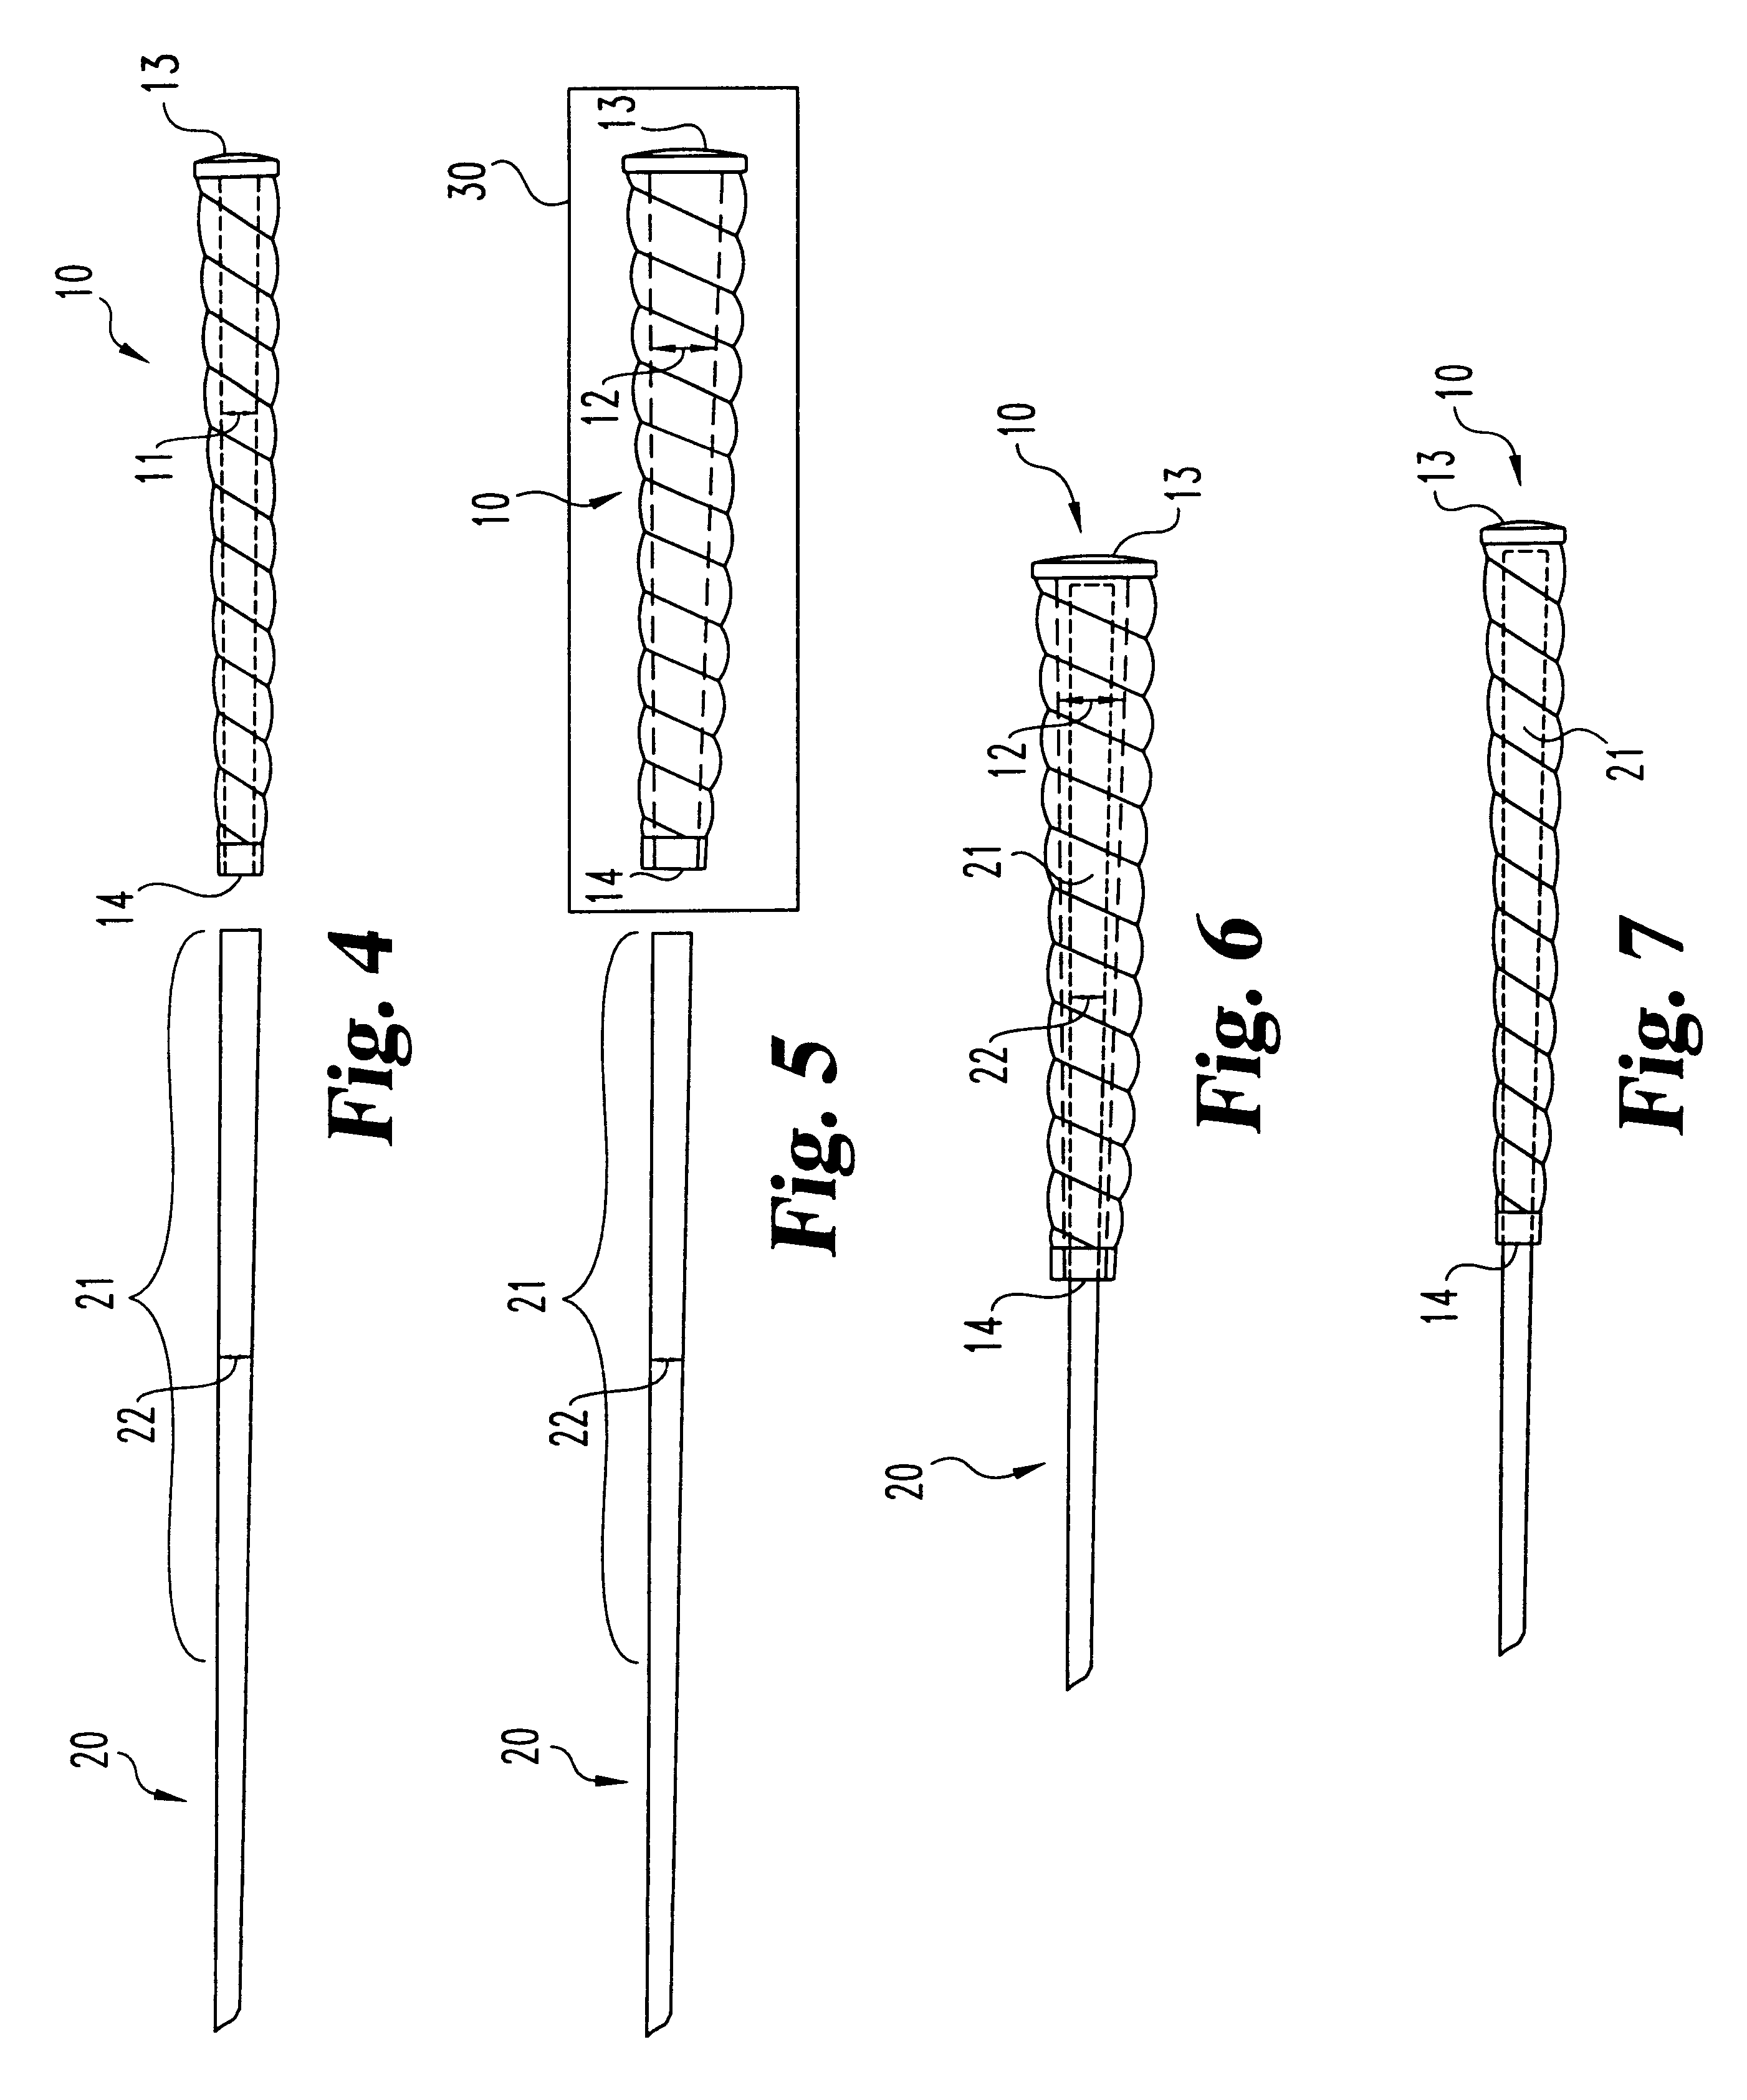 Methods for attaching an elastomeric sleeve to an elongate article